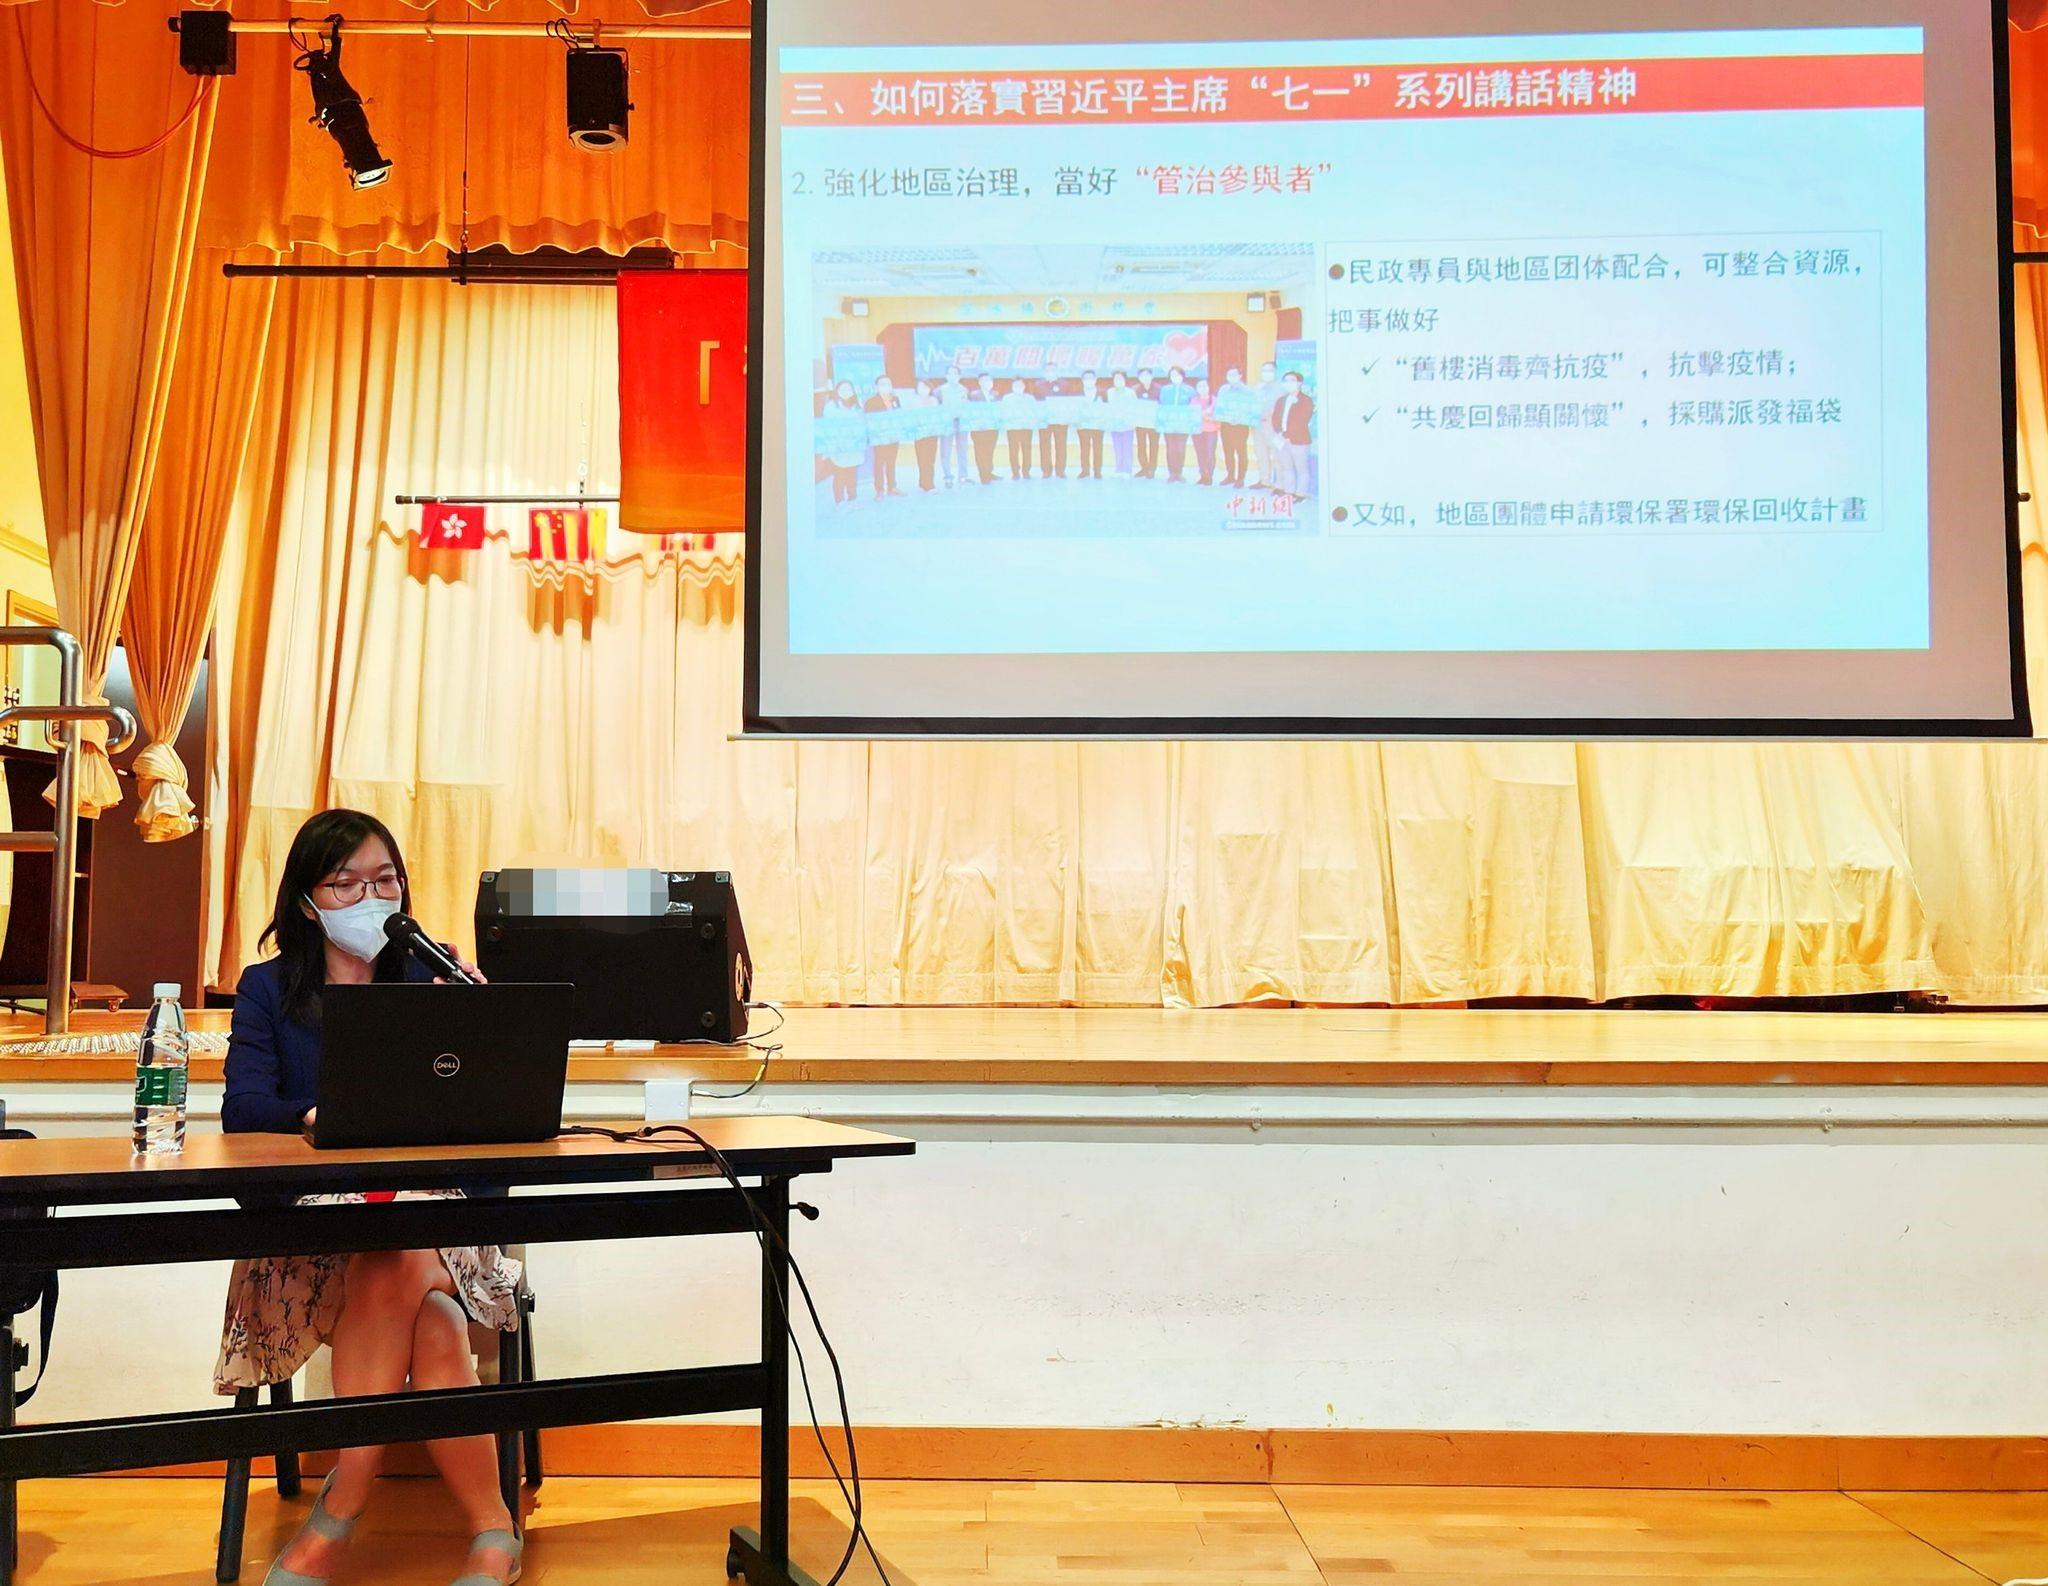 The Tsuen Wan District Office, together with the New Territories Association of Societies Tsuen Wan District Committee, today (July 22) jointly held the "Tsuen Wan District Seminar to Learn About the President's Important Speech on July 1 in Hong Kong" at Shek Wai Kok Community Hall. Photo shows the Deputy Director of the Bauhinia Academy of the Liaison Office of the Central People's Government in the Hong Kong Special Administrative Region, Dr Chen Suting, speaking at the session.